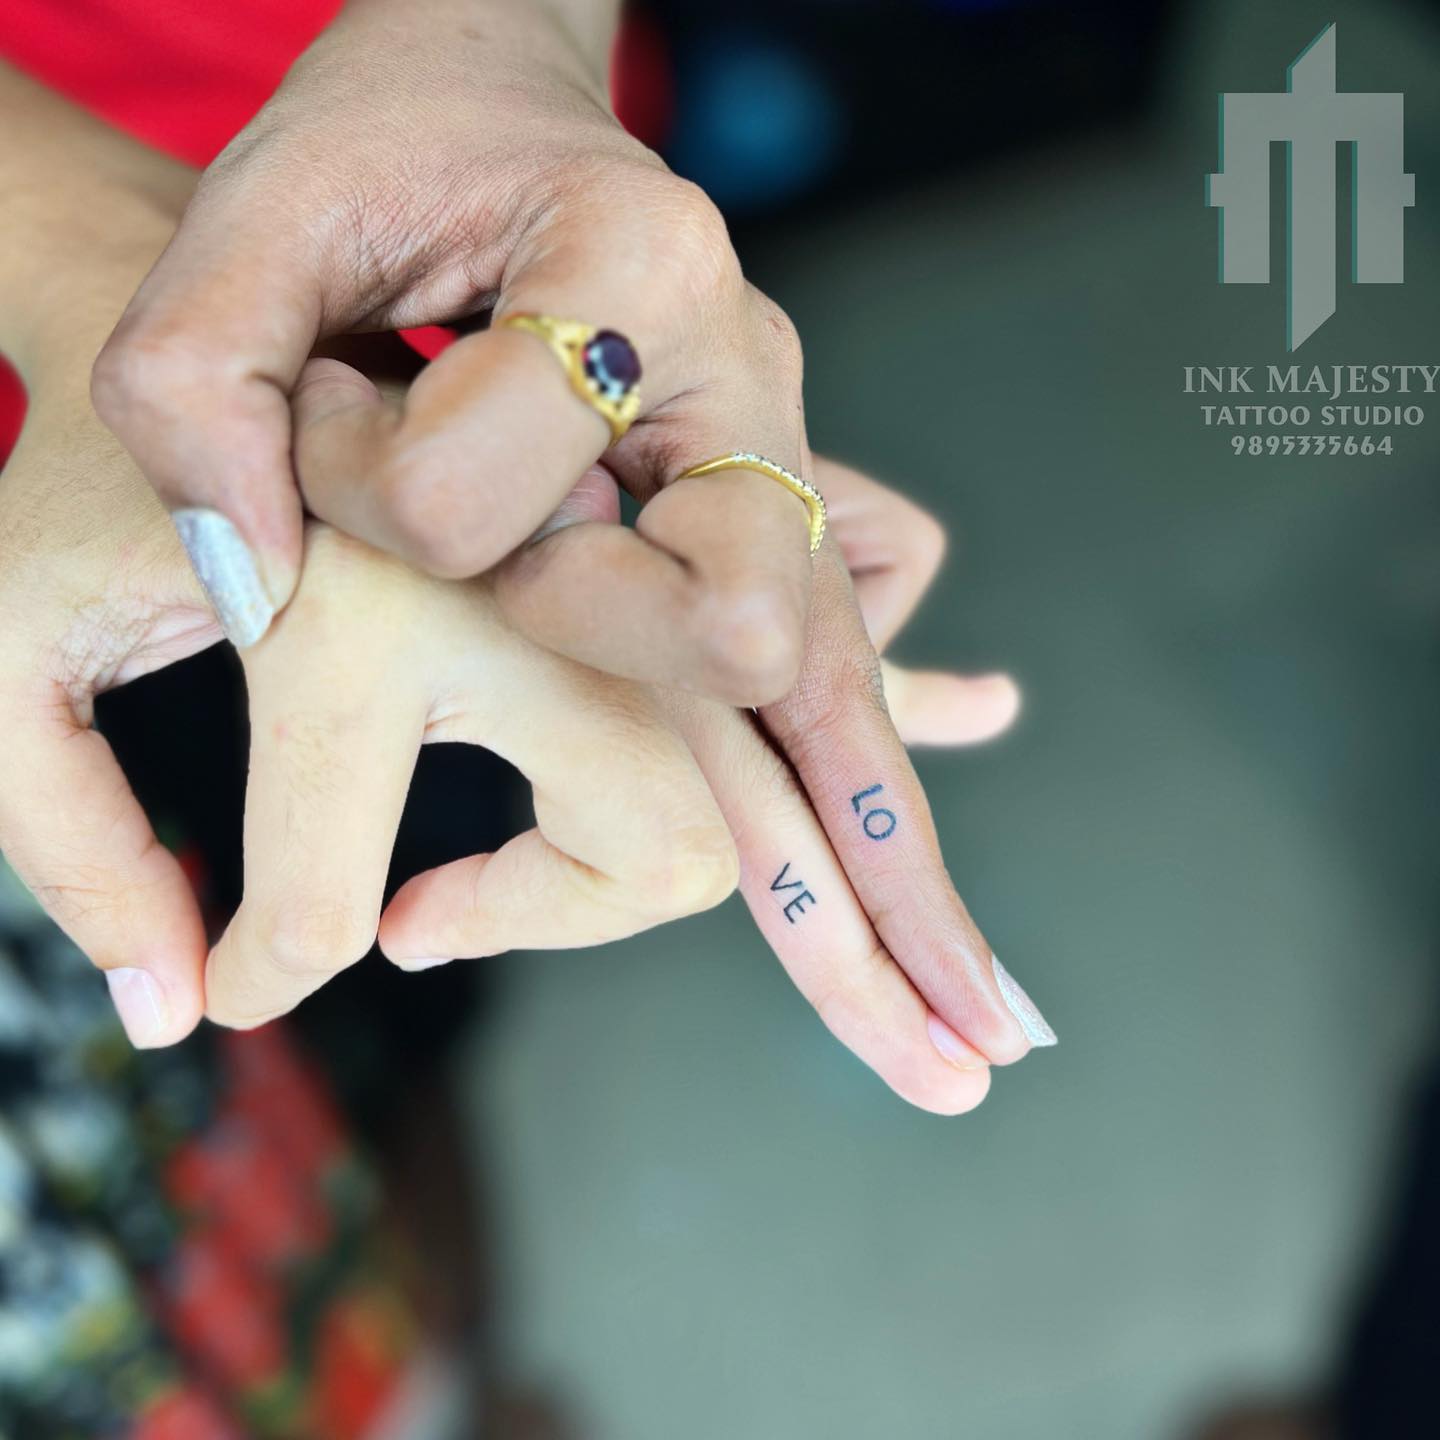 Wedding Tattoos on Finger: 5 Reasons Why (And Why Not) To Get -  Relationships - eNotAlone